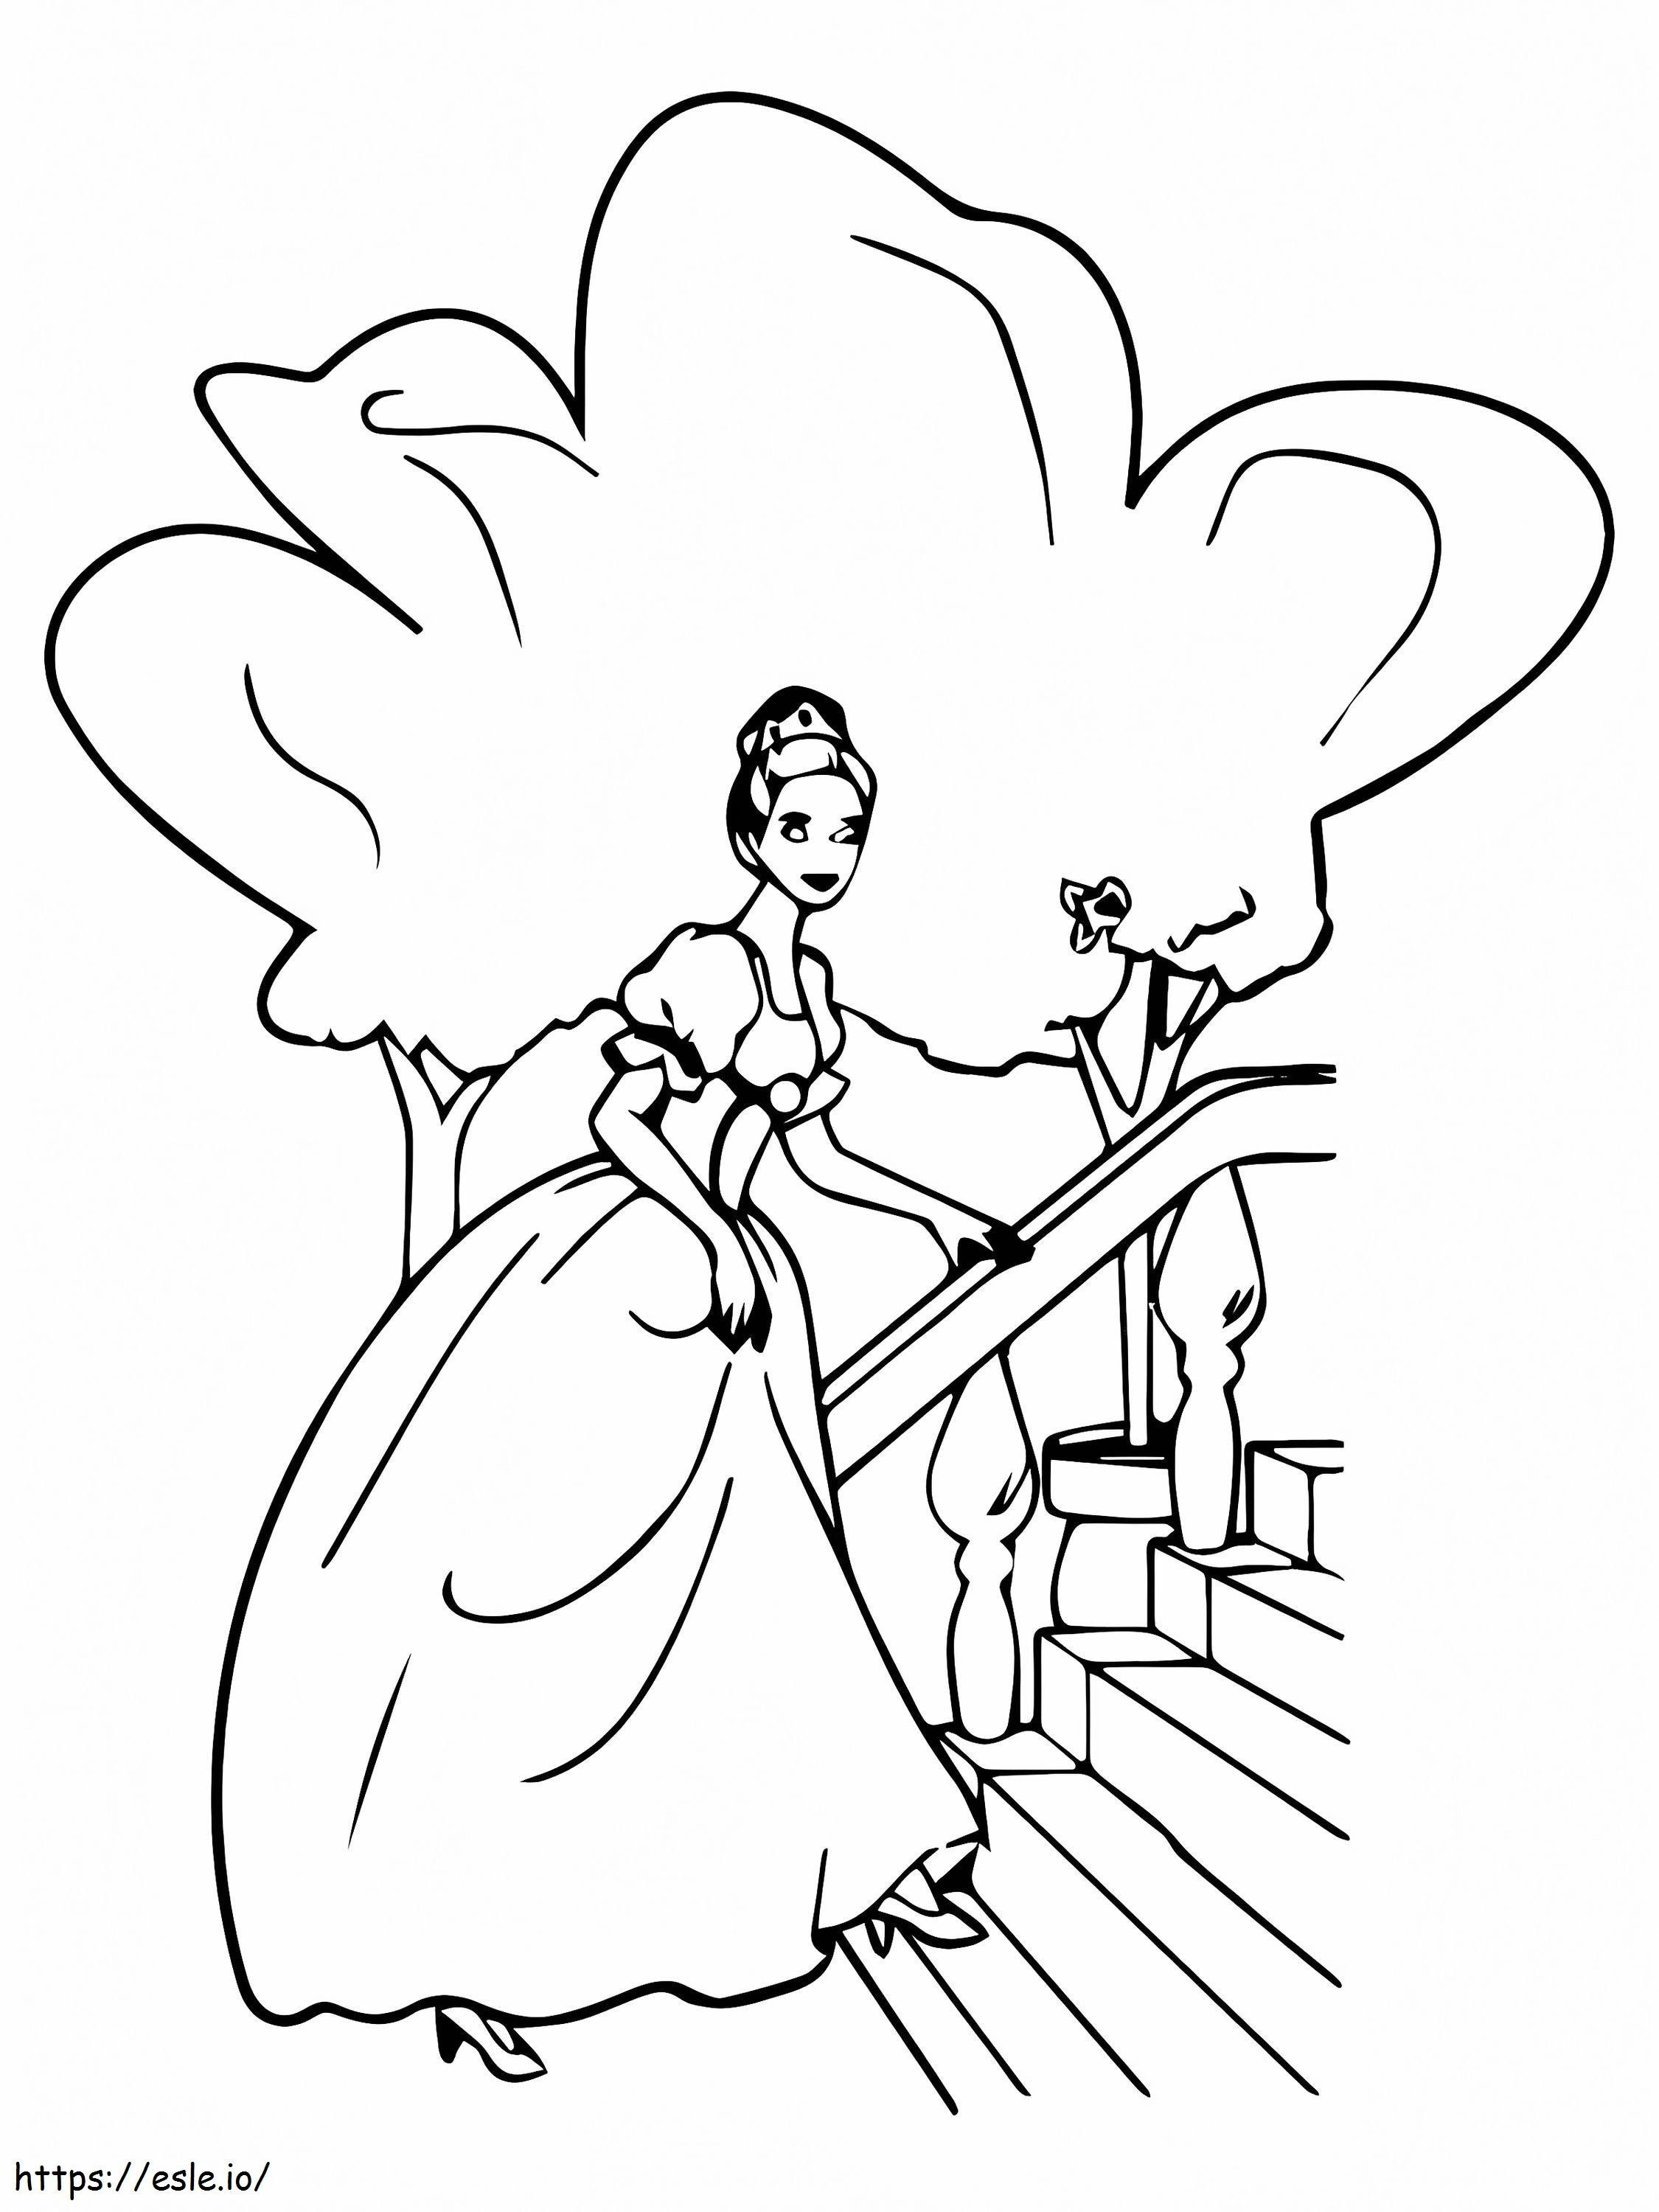 Delighted Princess And The Pea coloring page